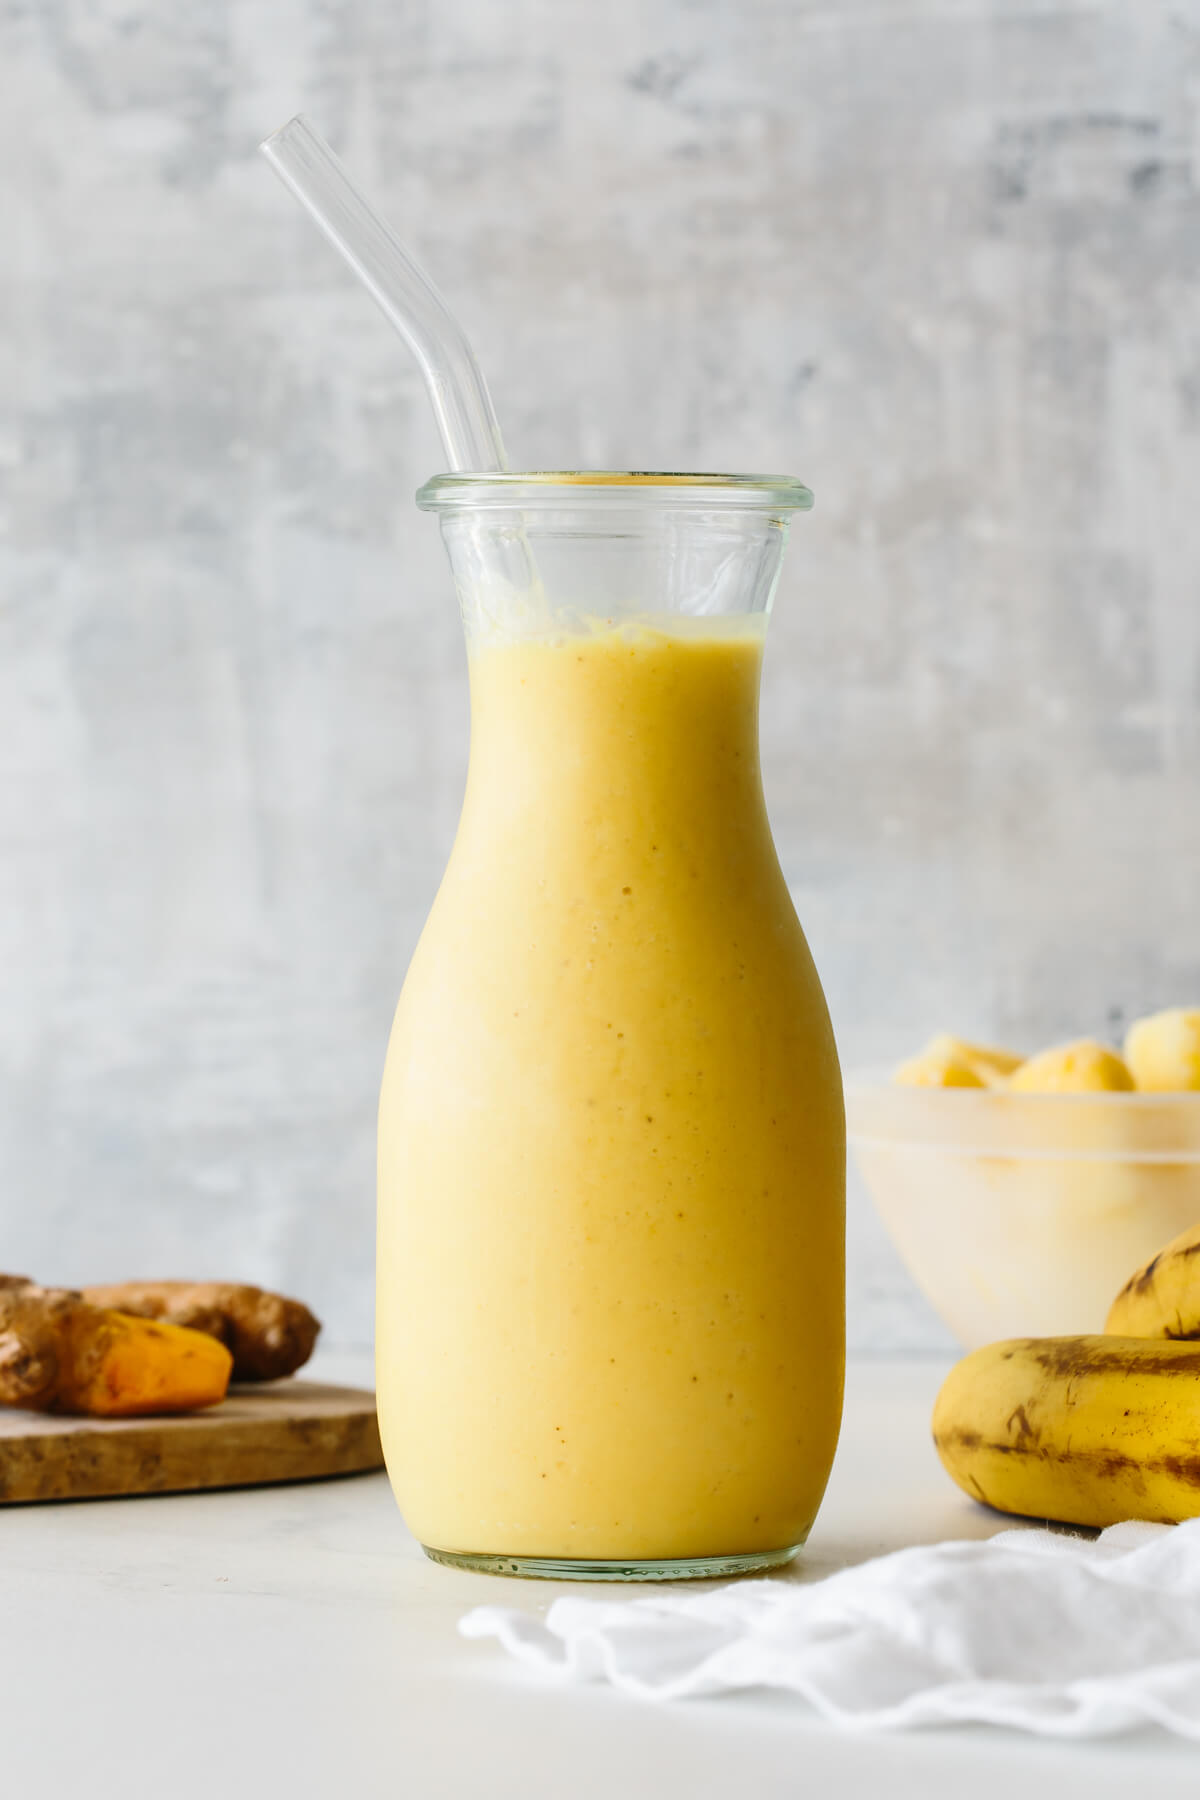 Turmeric smoothie in a glass jar with straw and ingredients in the background.